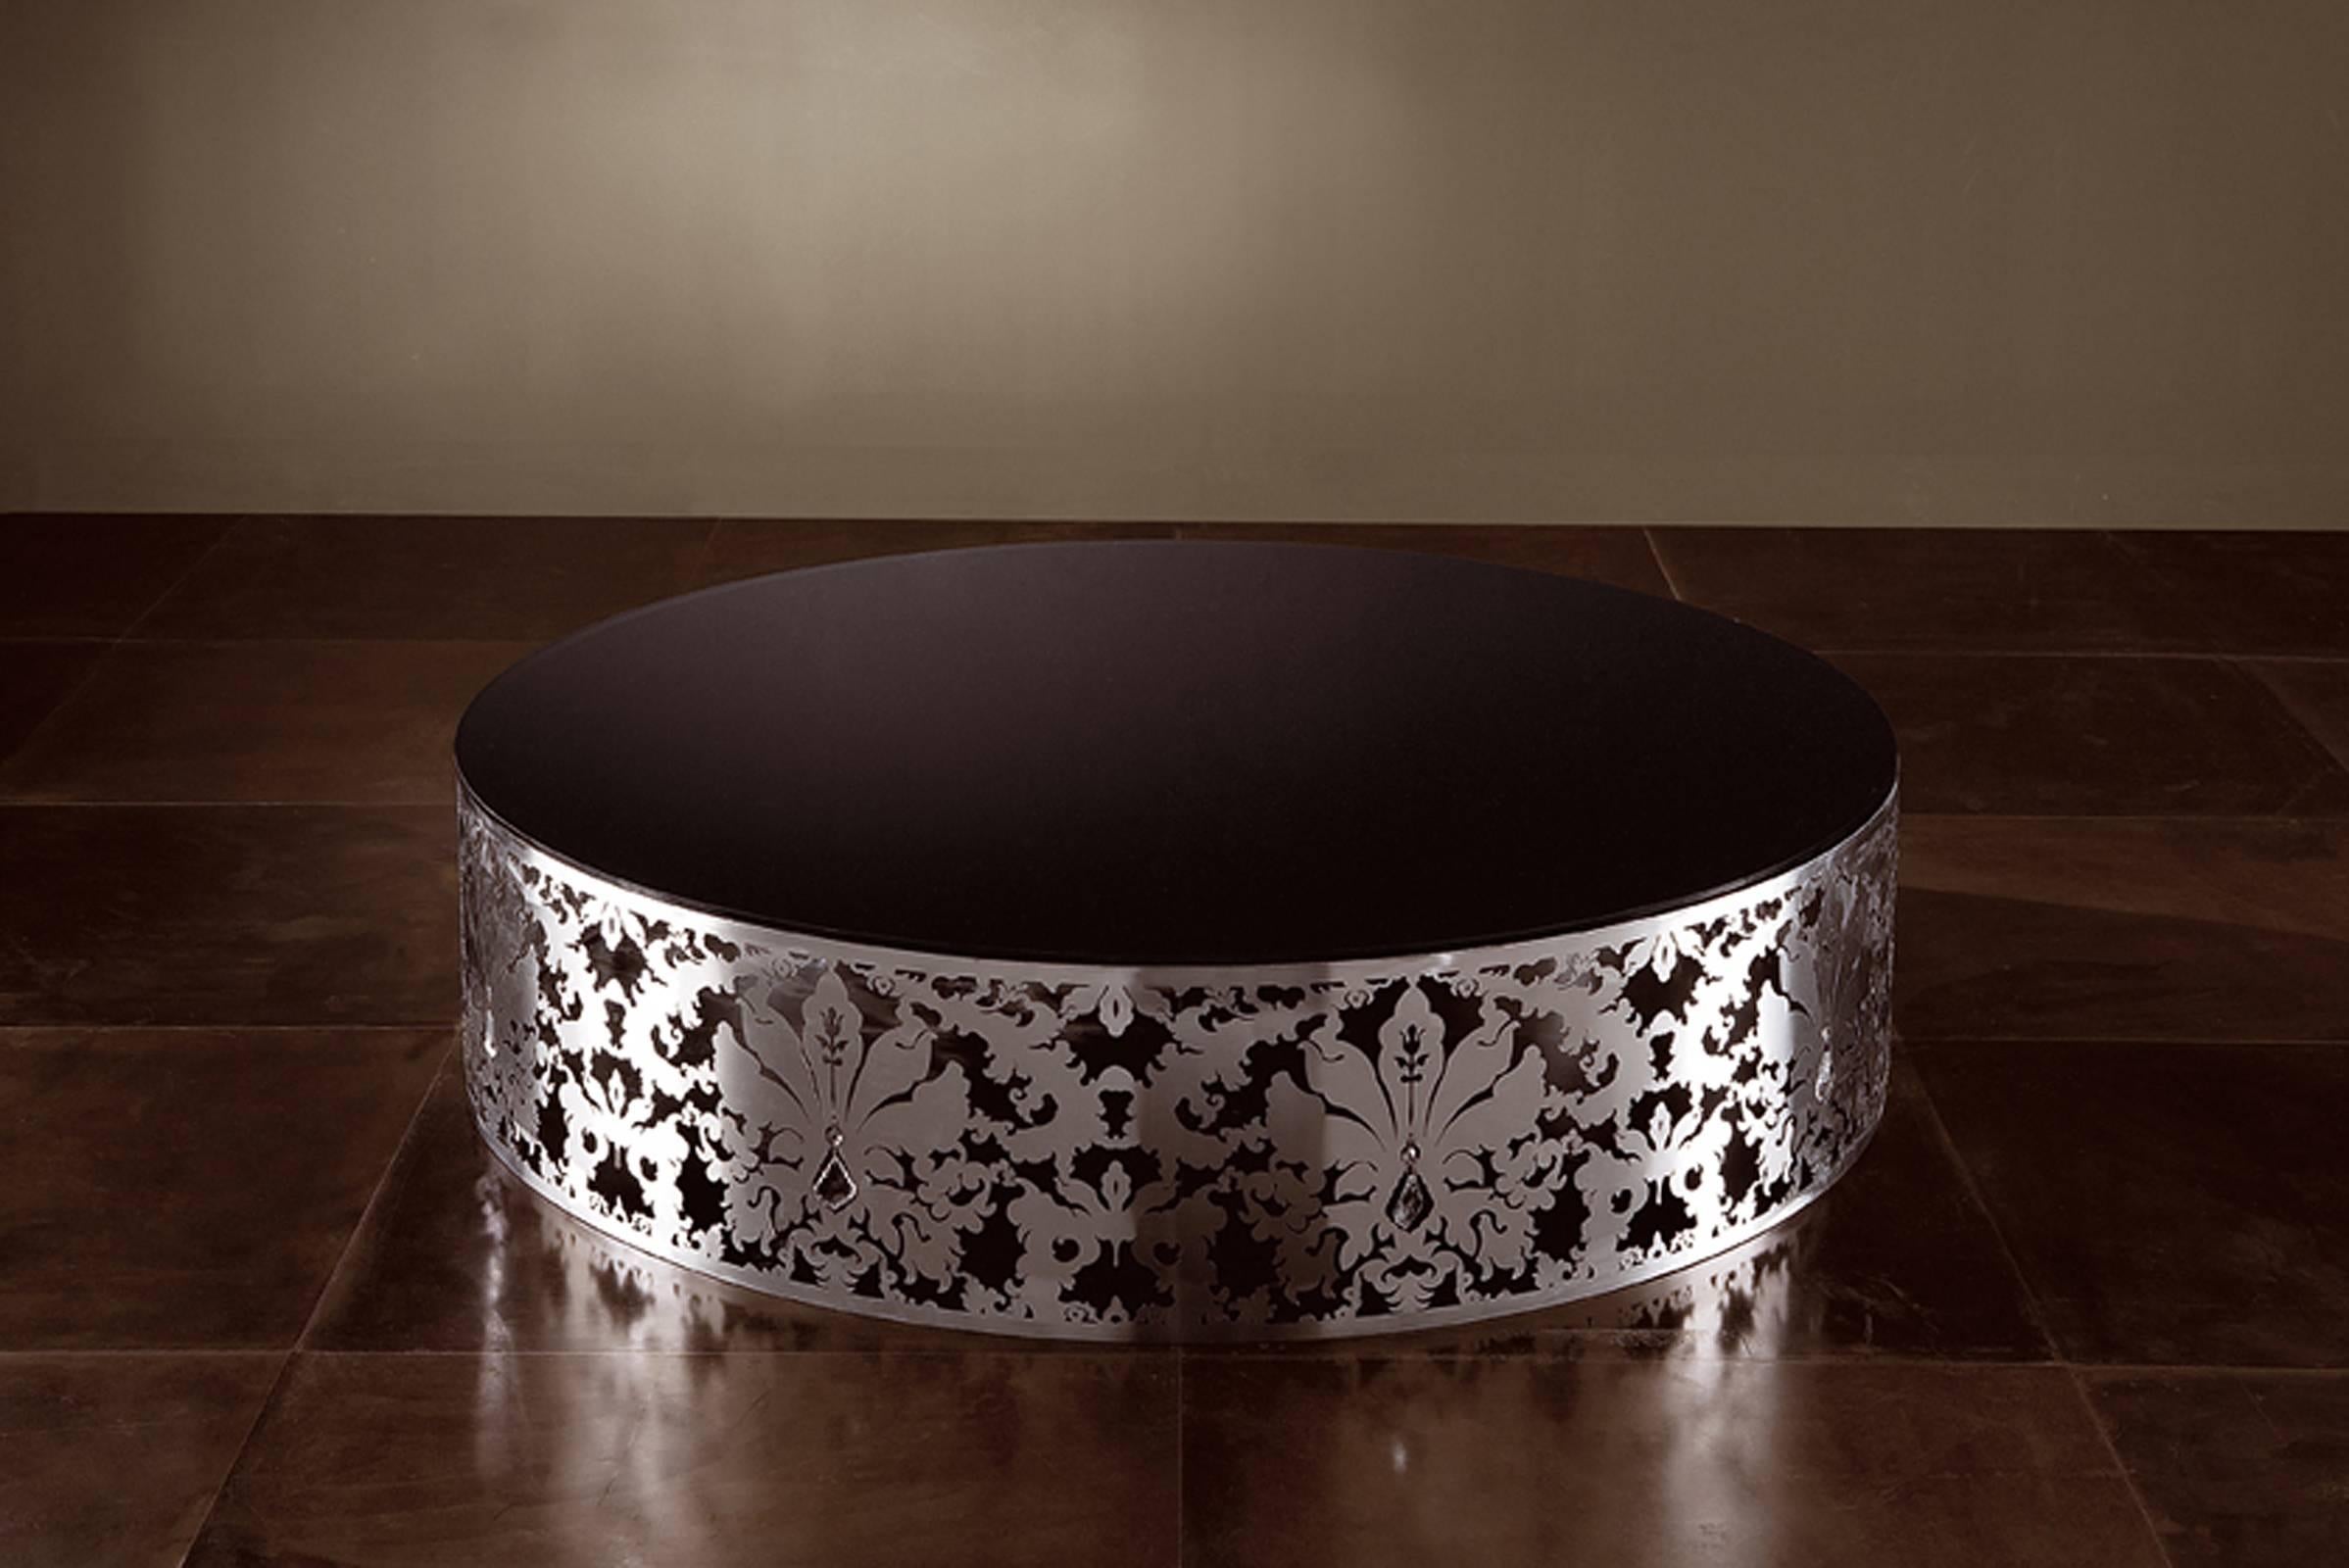 Round coffee table Flora in polished stainless steel
base, Top in White or Black Glass.
Ø105xH32cm, Price: 4500,00€
Available in Ø140xH32cm, Price: 7300,00€